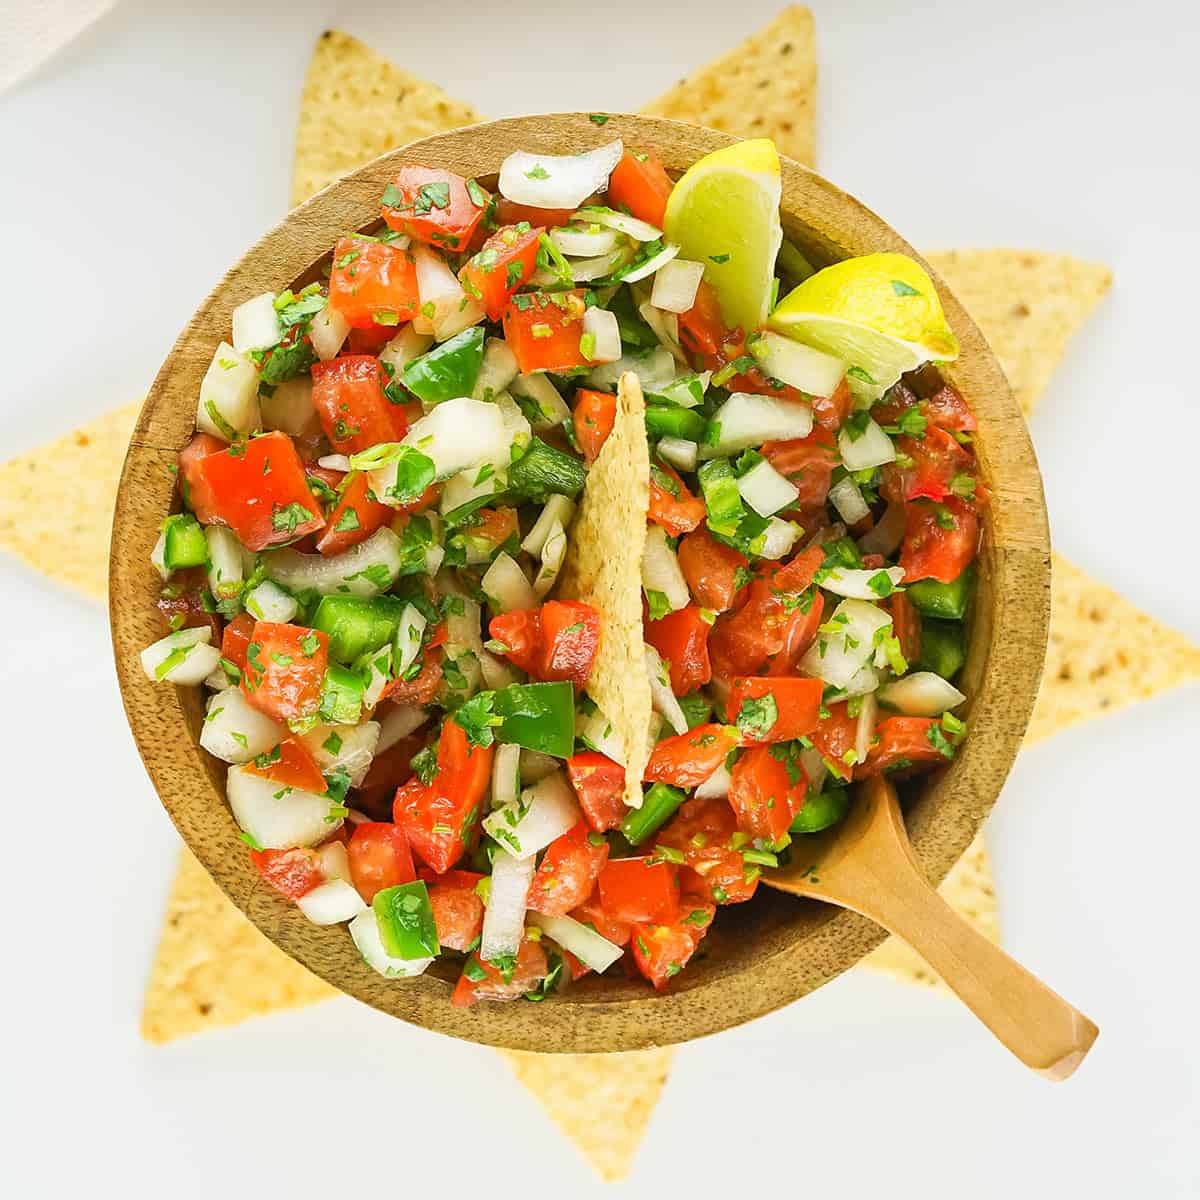 pico de gallo in a brown serving bowl with tortilla chips surrounding